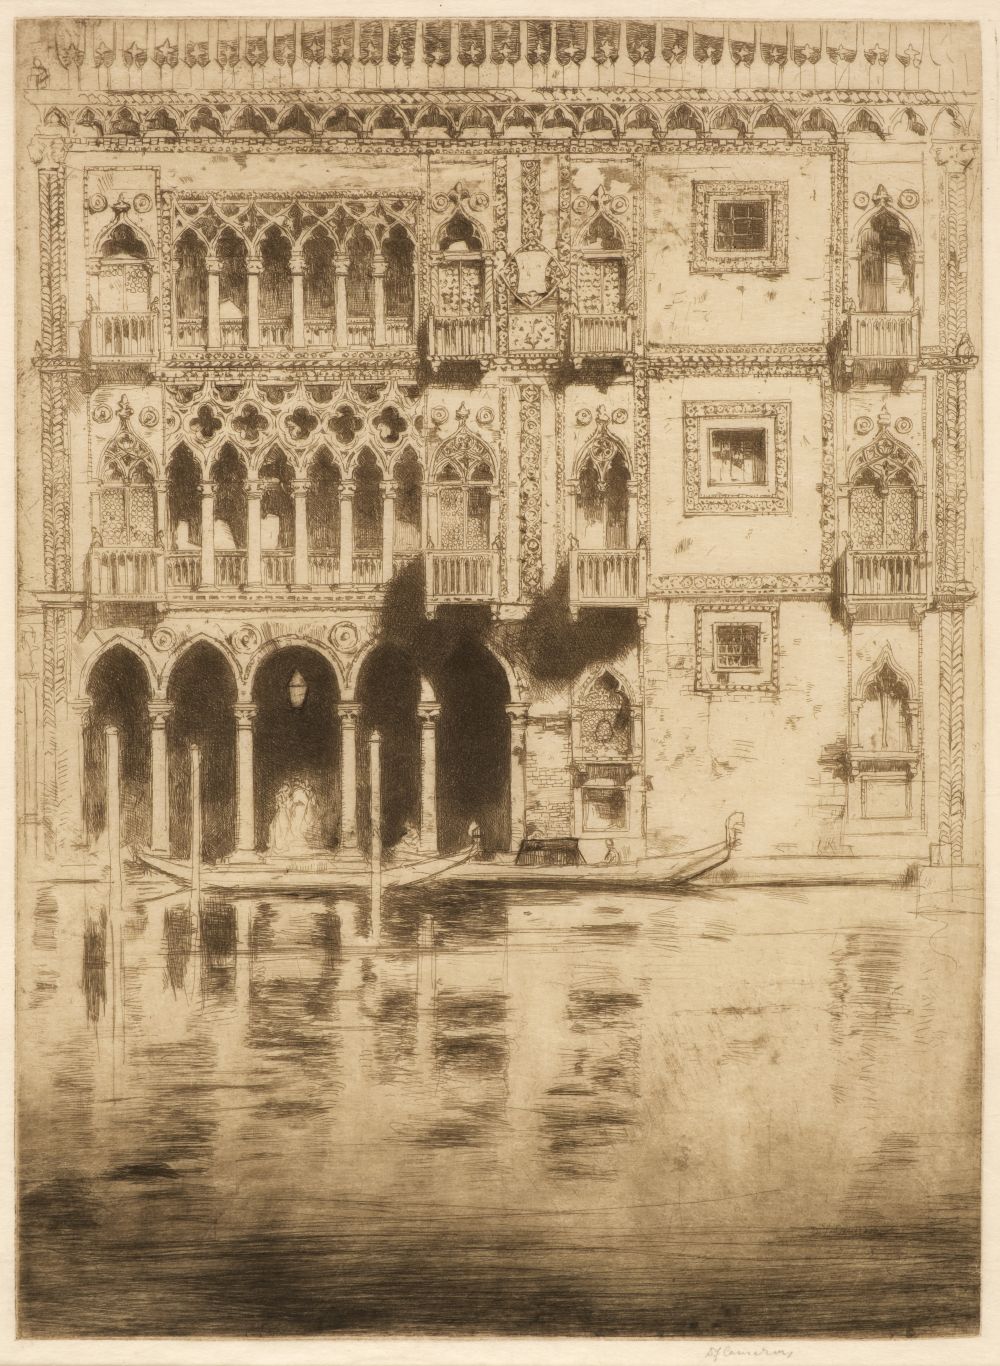 Cameron (David Young, 1865-1945). Ca' d'Oro, etching, 1900